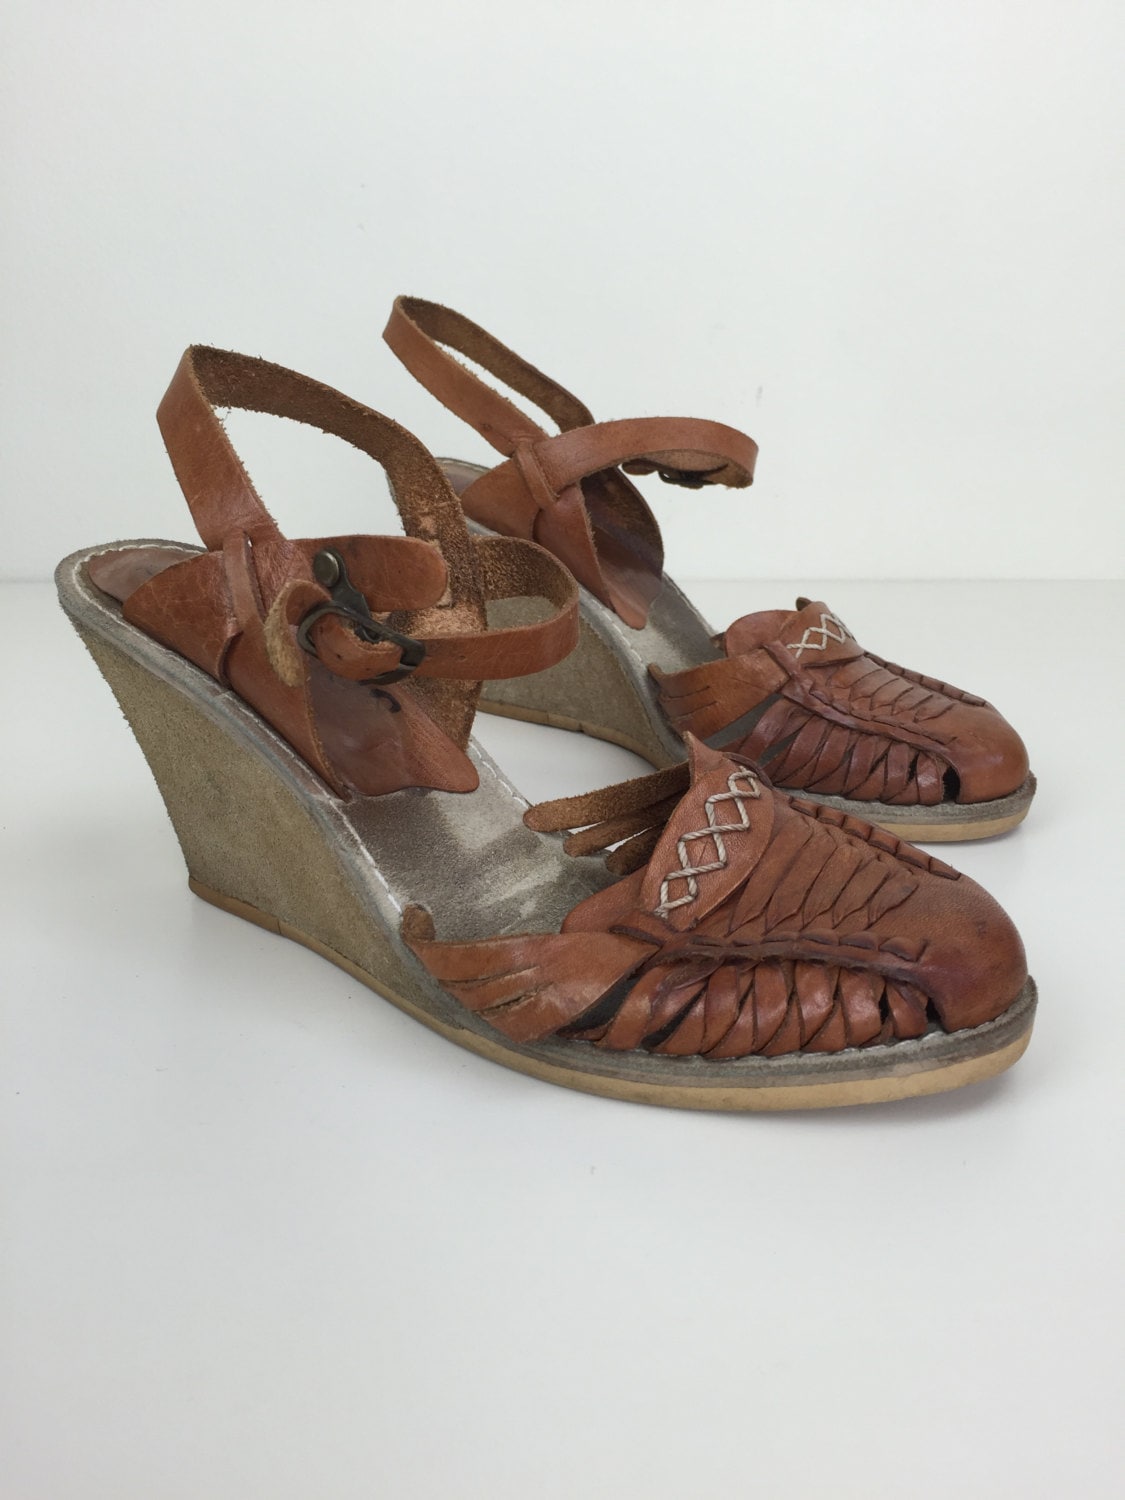 woven brown leather wedge huarache sandals sz 7 70s